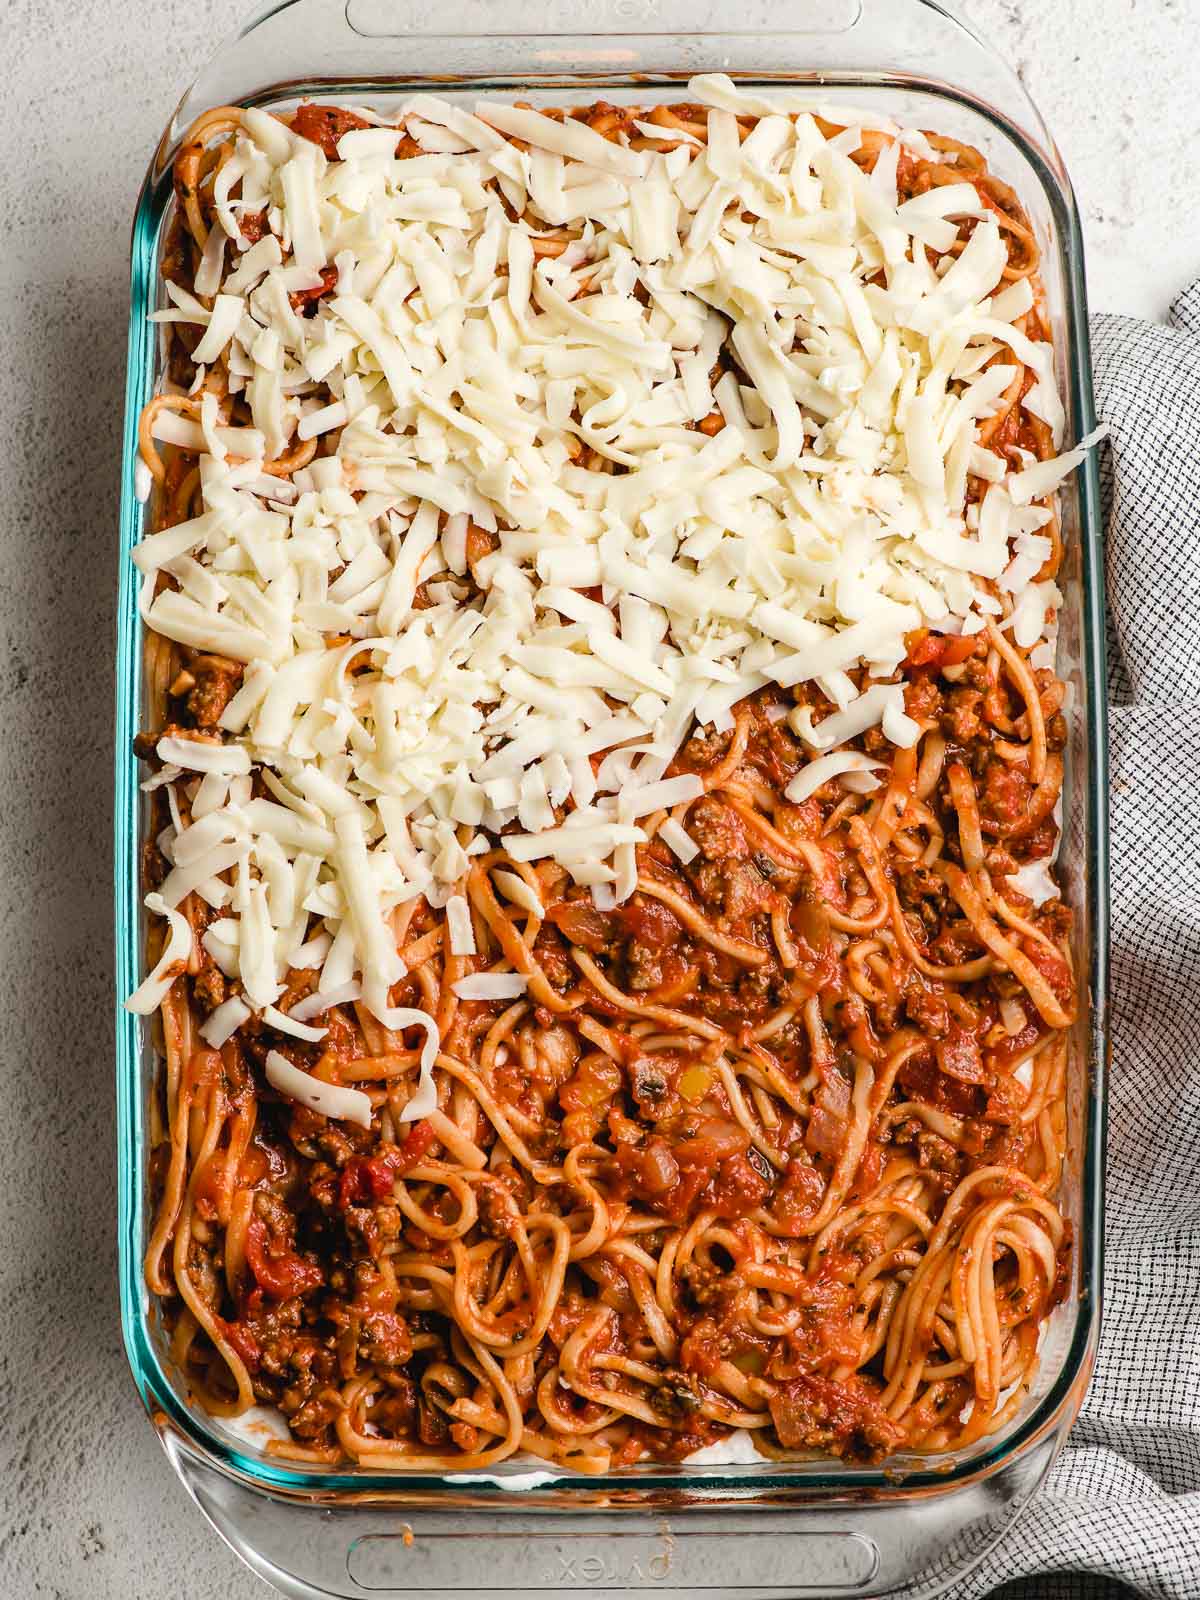 Glass casserole dish full of spaghetti, cottage cheese, and cheese.